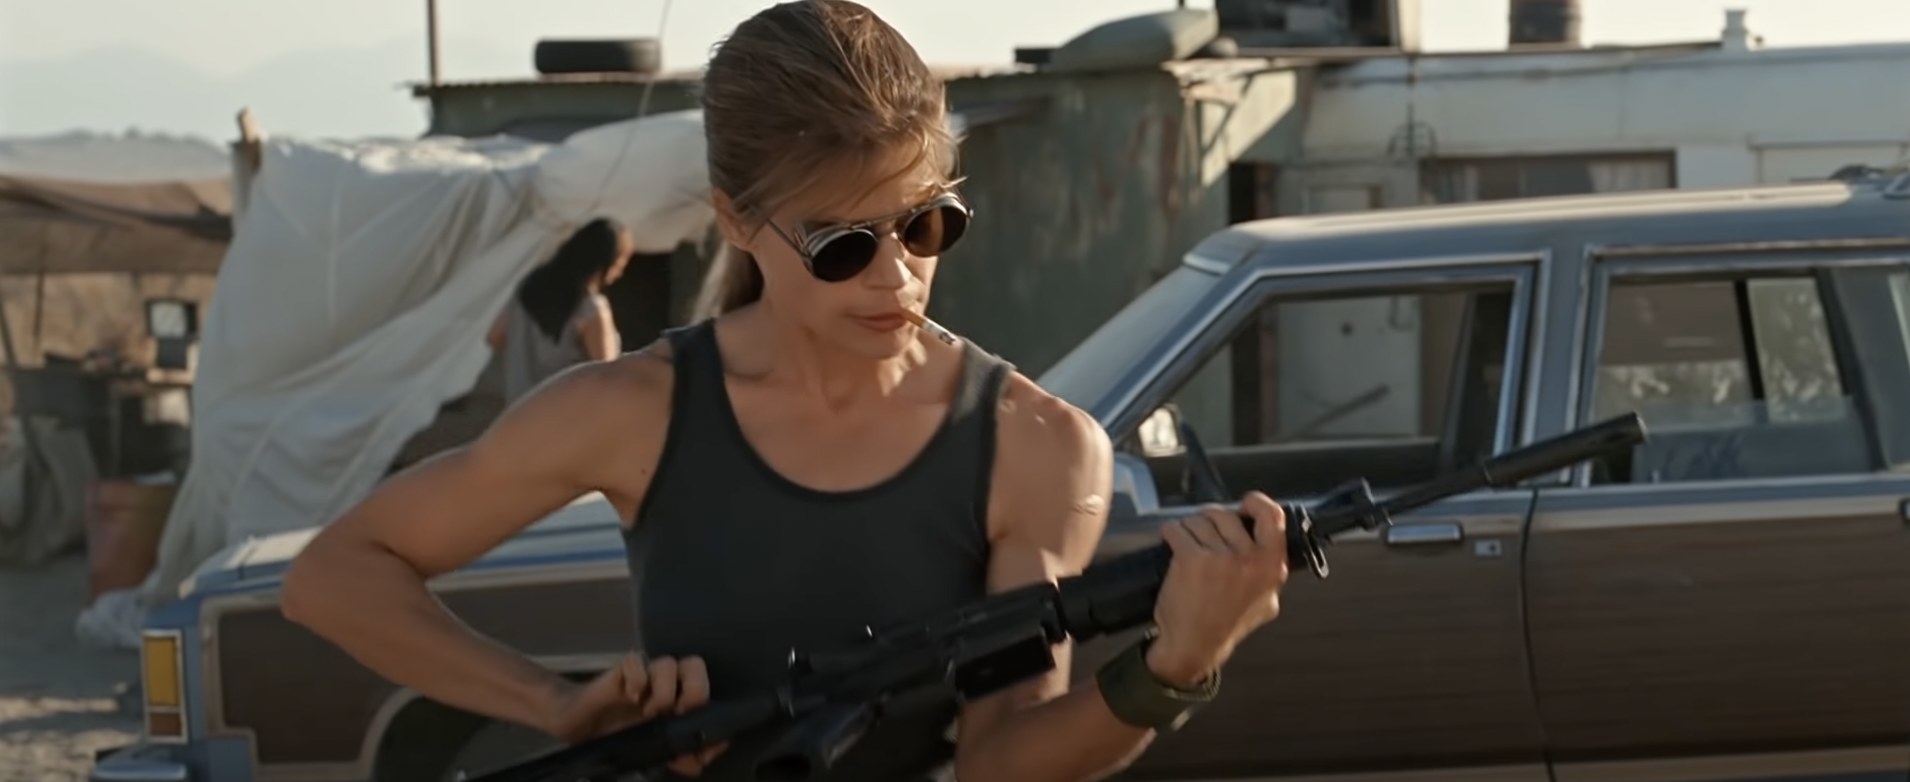 Sarah Connor loads a gun with sunglasses on